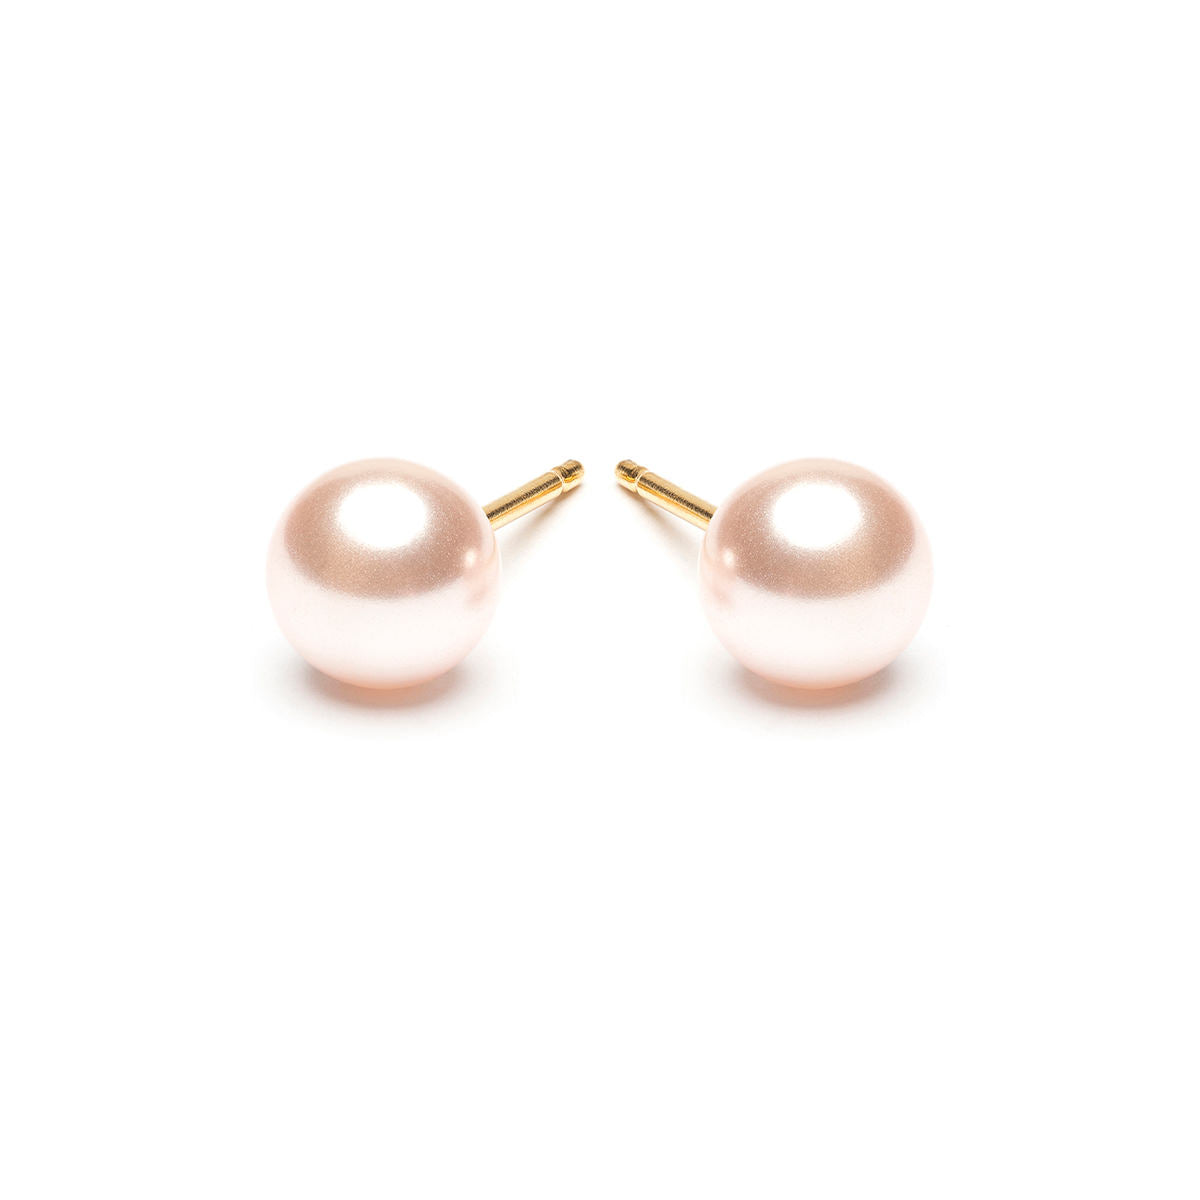 Gold Plated 6 mm Pink Pearl Stud Earrings - Simply Whispers